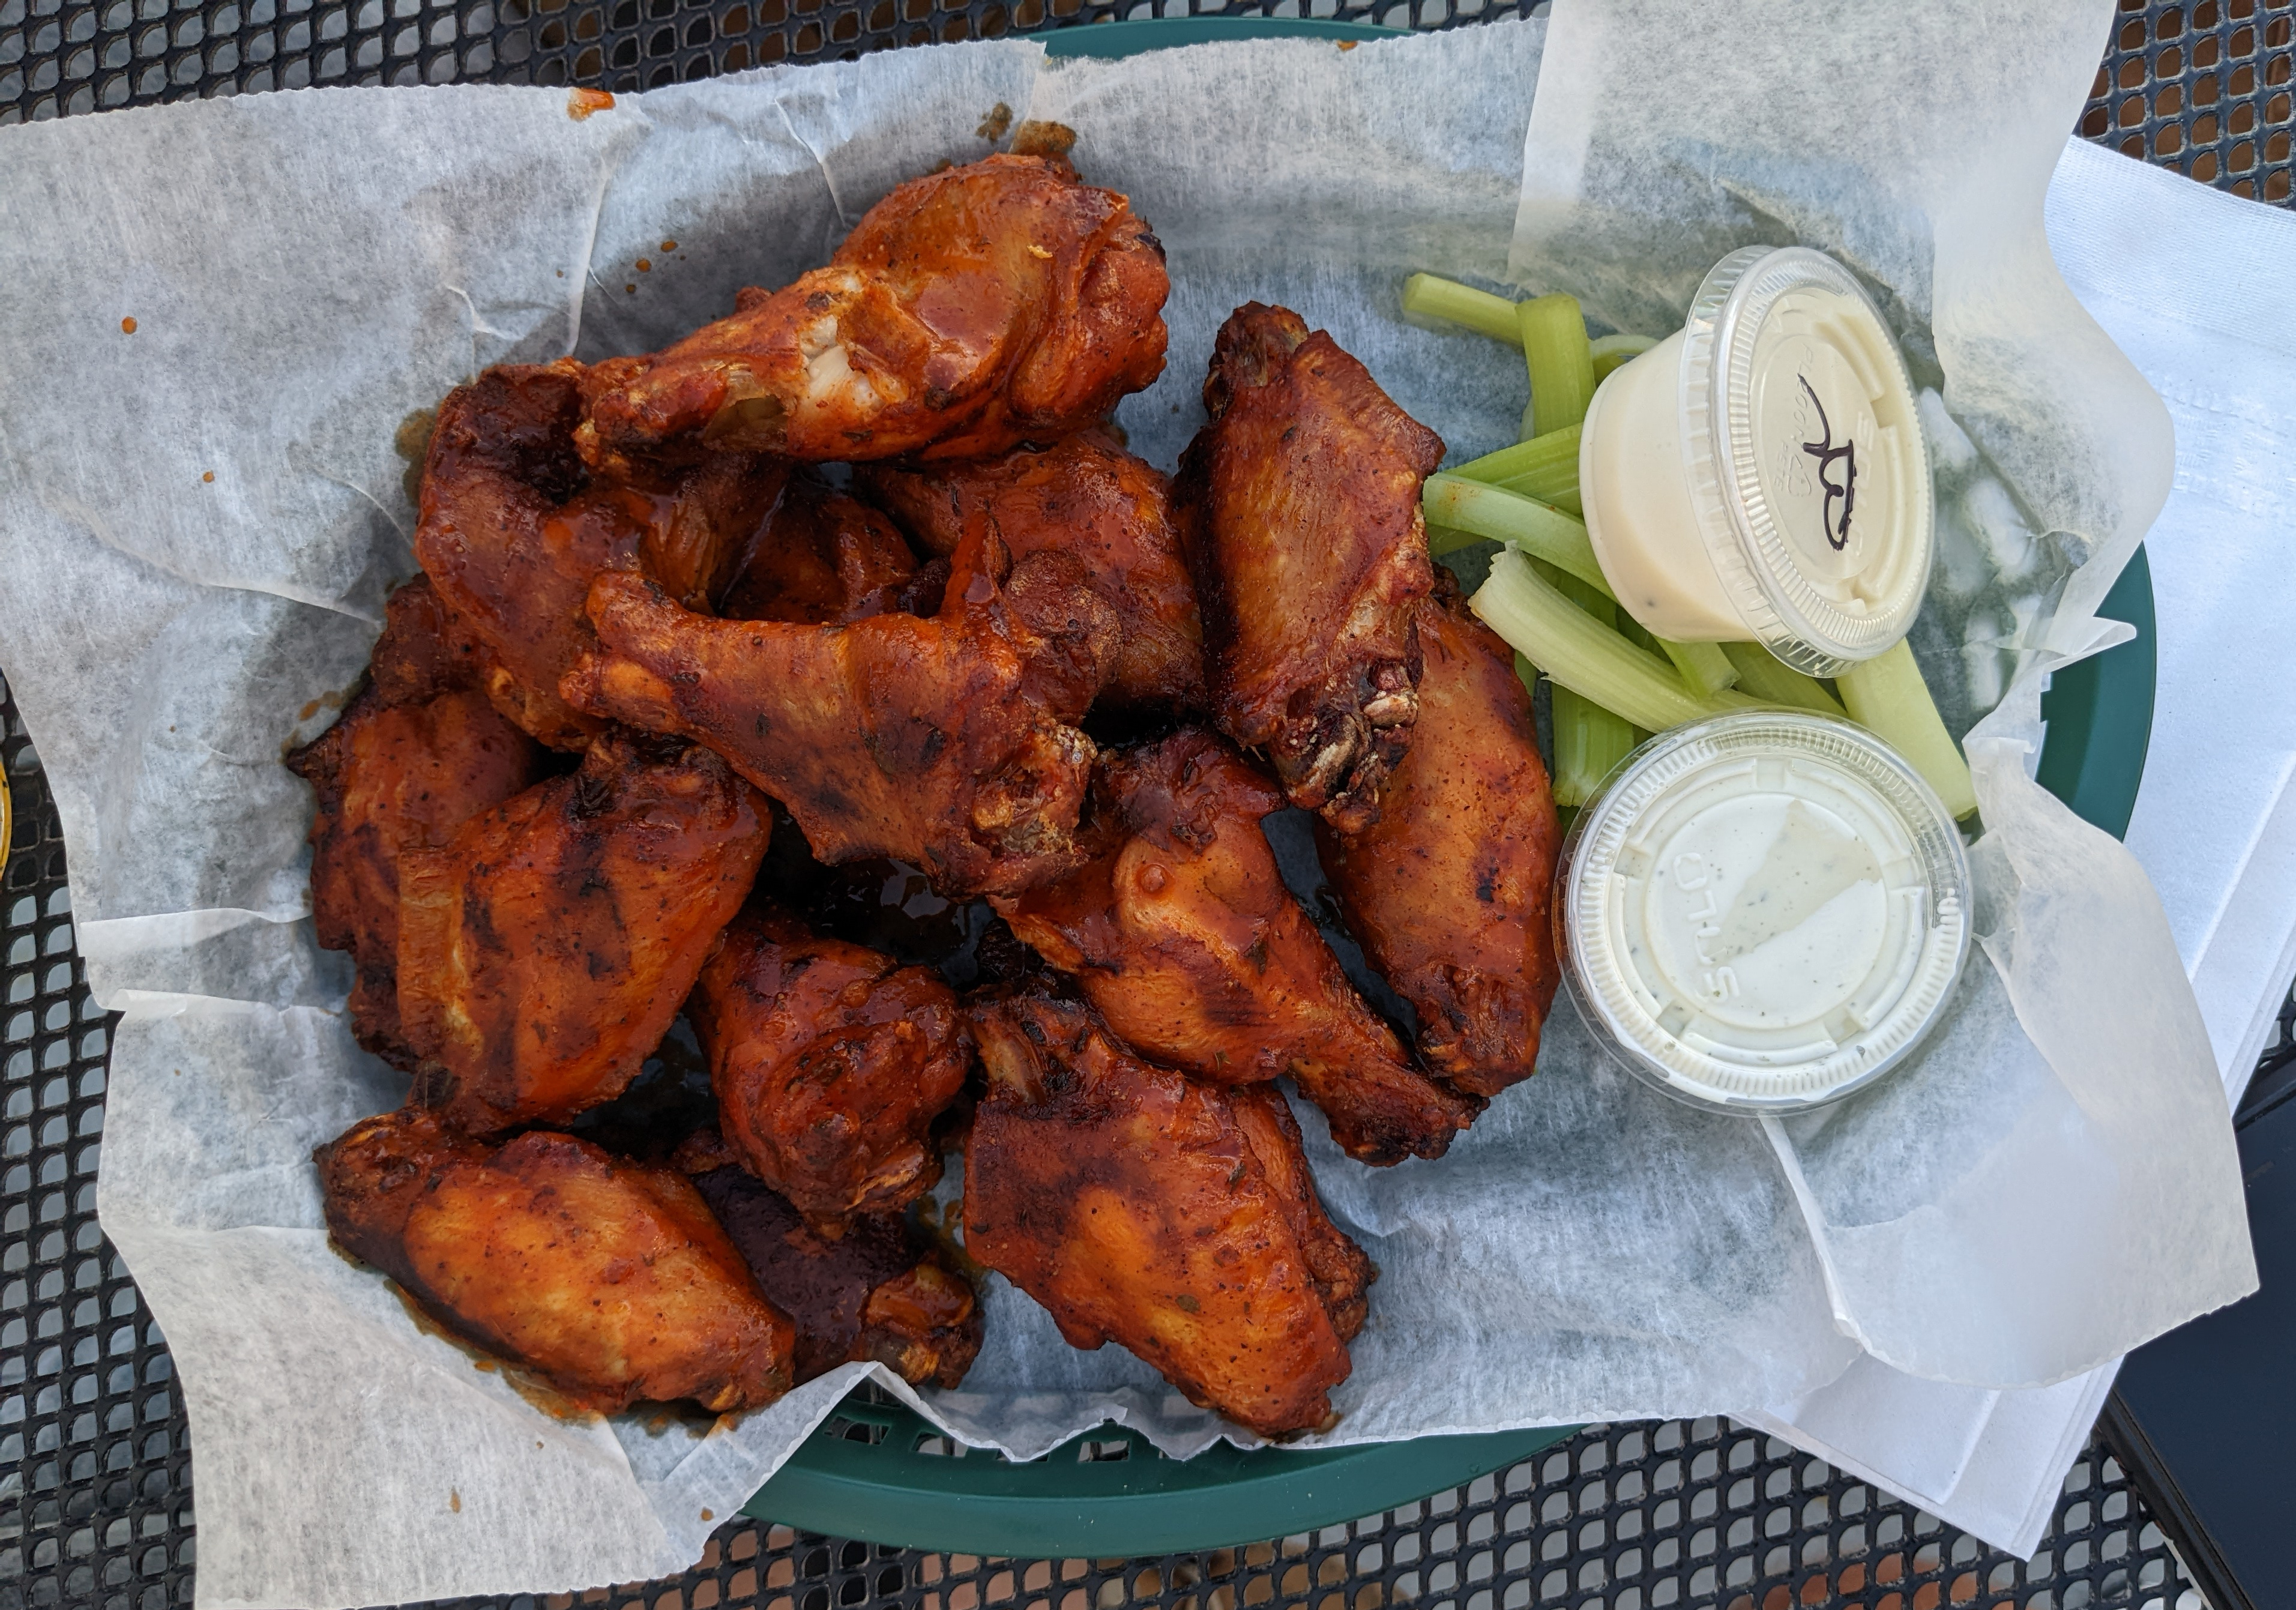 On a black outdoor table at Bunny's Tavern, there is a basket lined with parchment paper and full of chicken wings, celery, and a cup of ranch. Photo by Tayler Neumann.